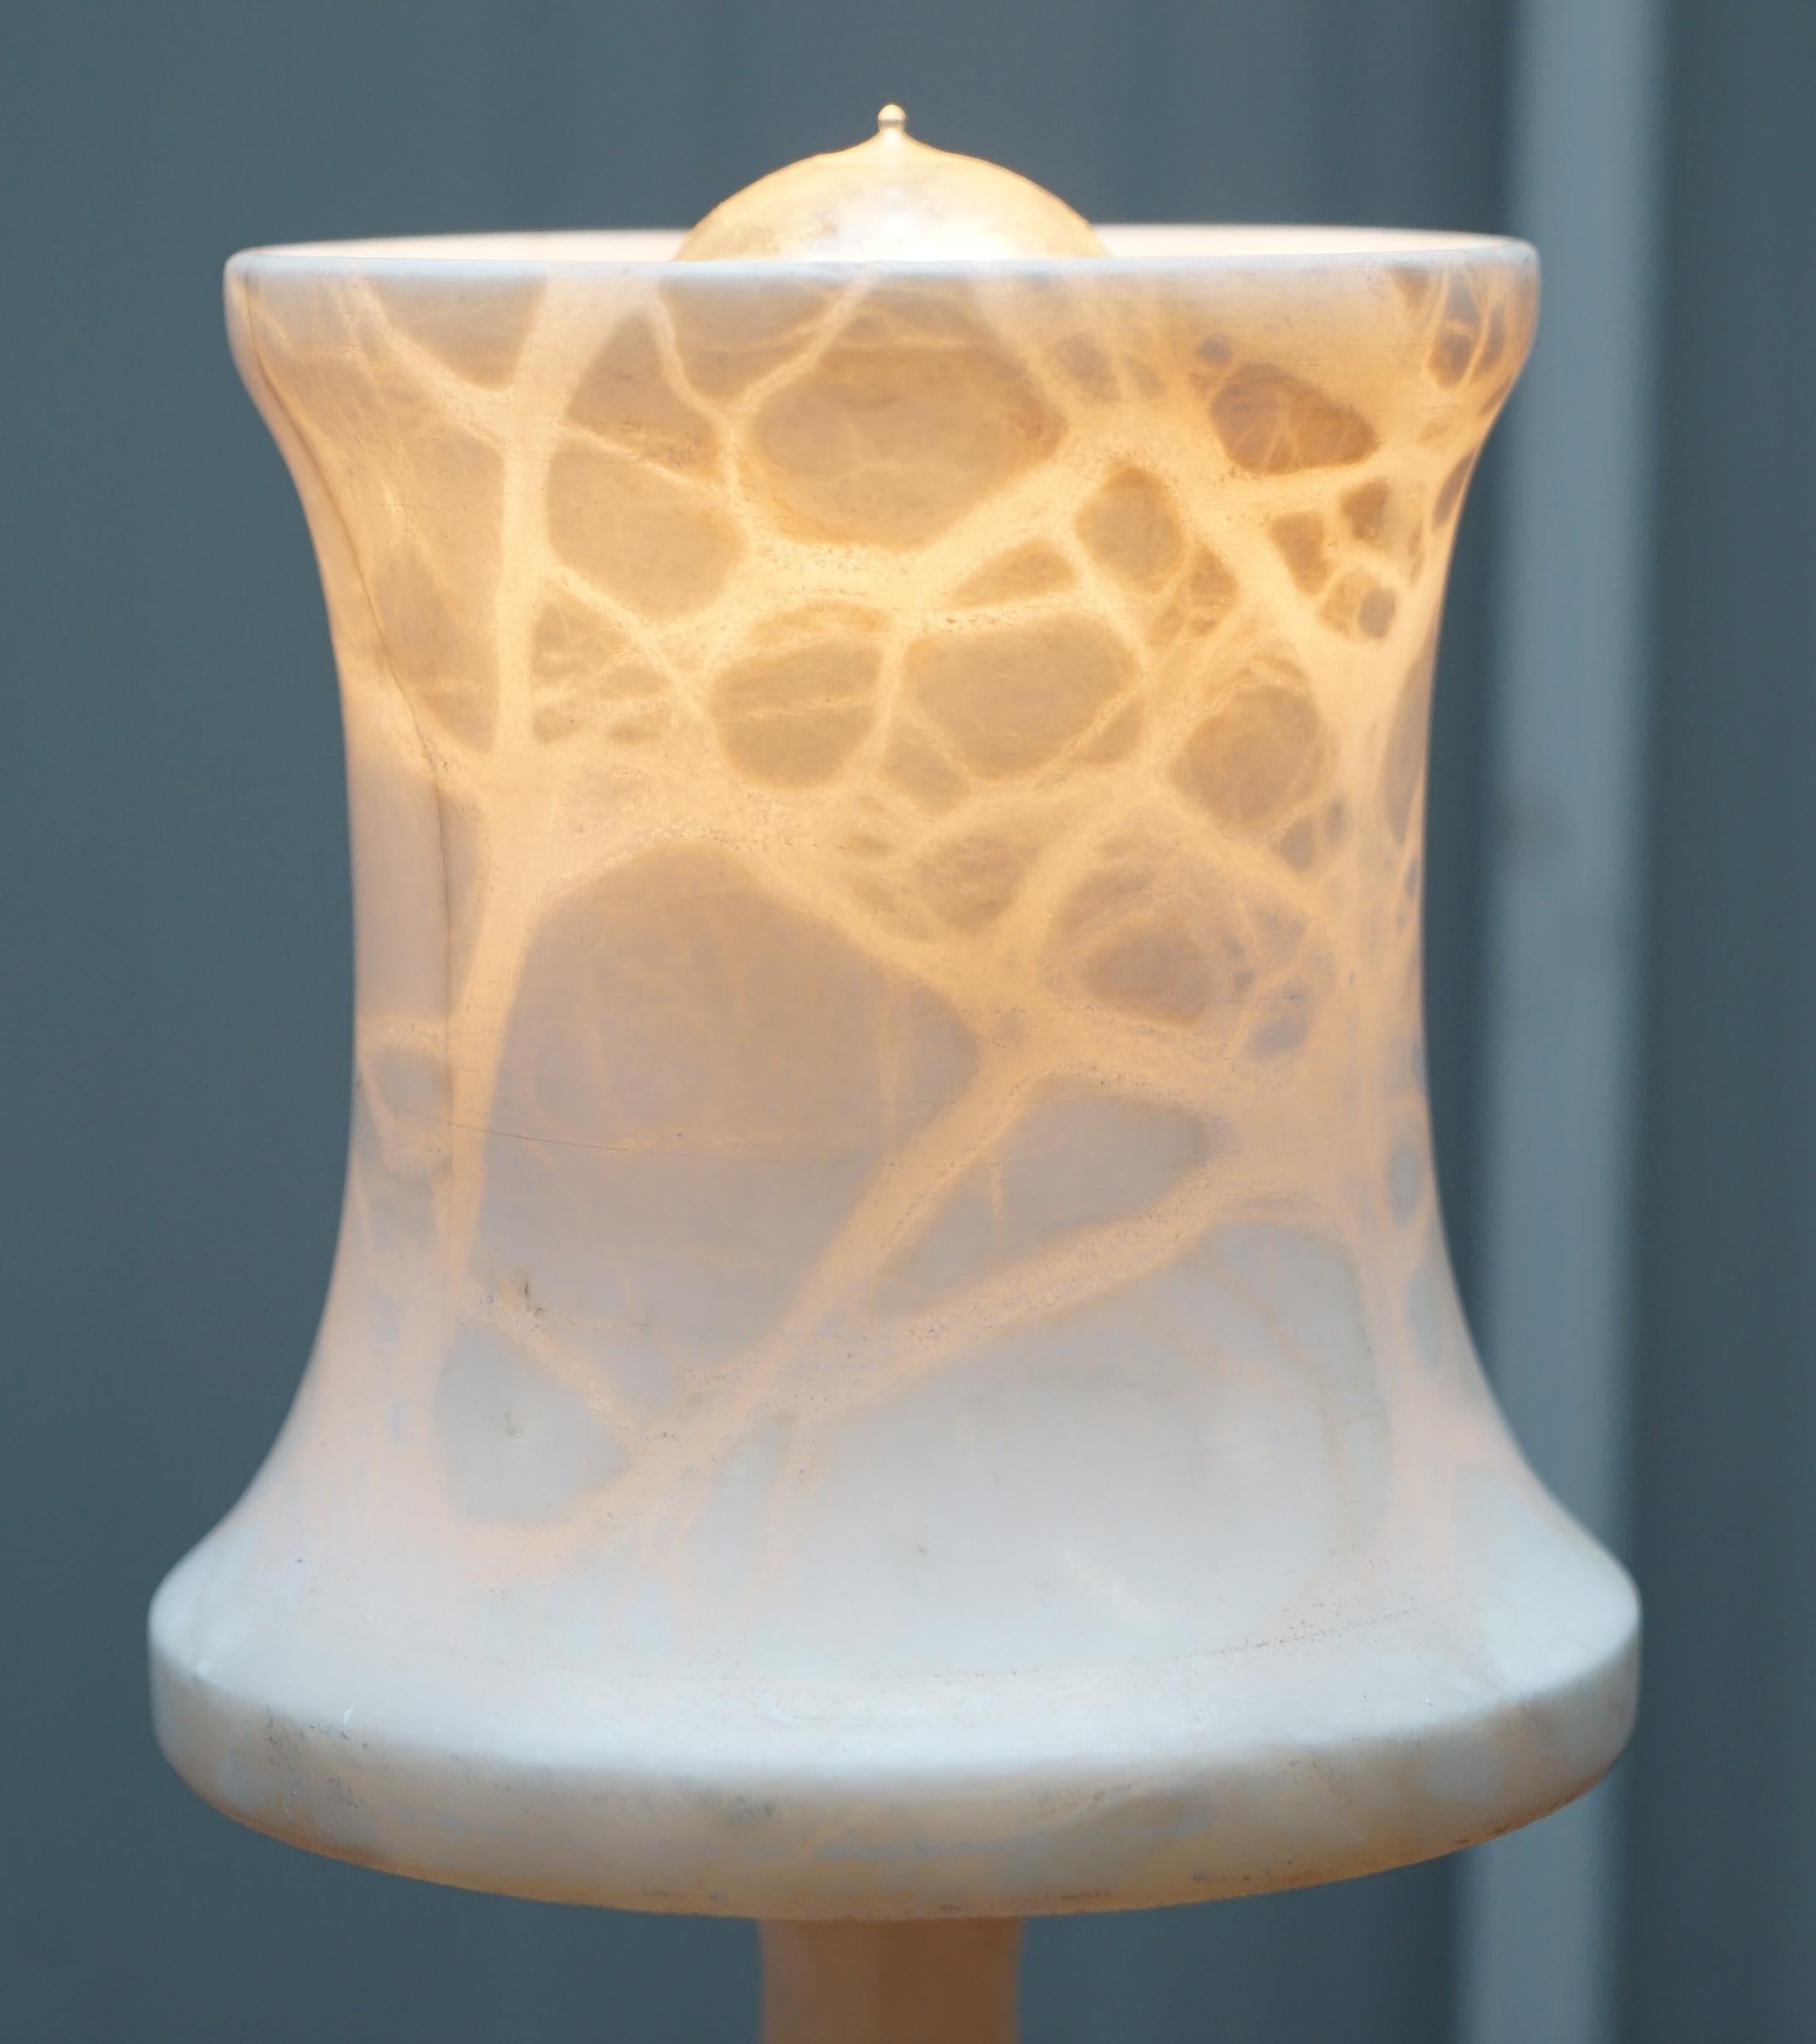 Hand-Crafted Stunning Solid Veined Marble Lamp Including Marble Shade, circa 1900 English